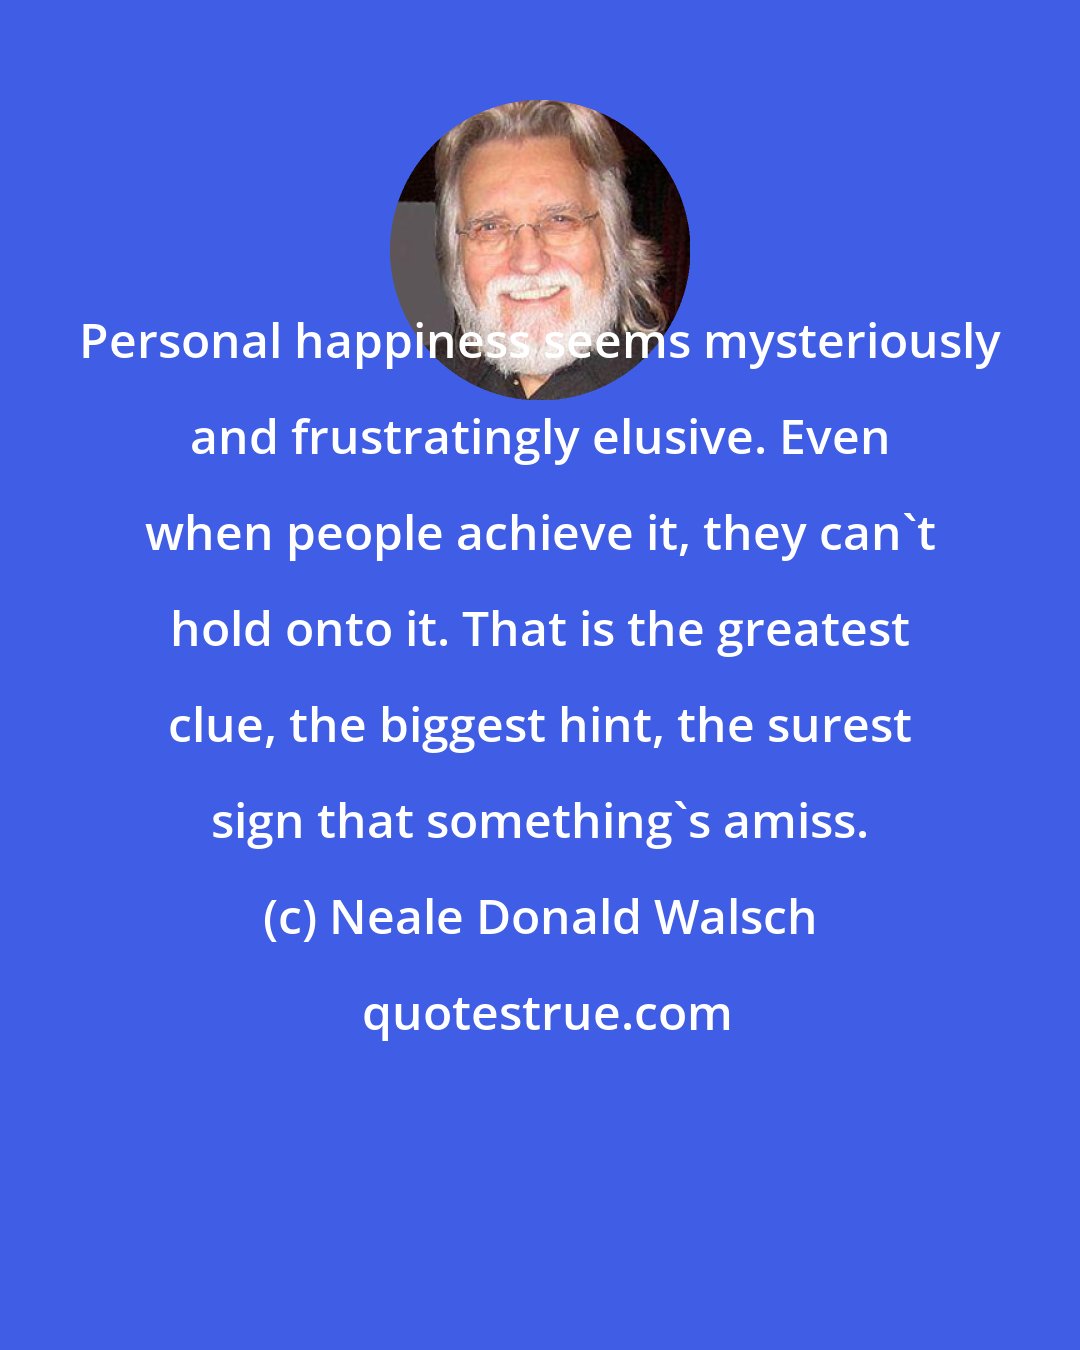 Neale Donald Walsch: Personal happiness seems mysteriously and frustratingly elusive. Even when people achieve it, they can't hold onto it. That is the greatest clue, the biggest hint, the surest sign that something's amiss.